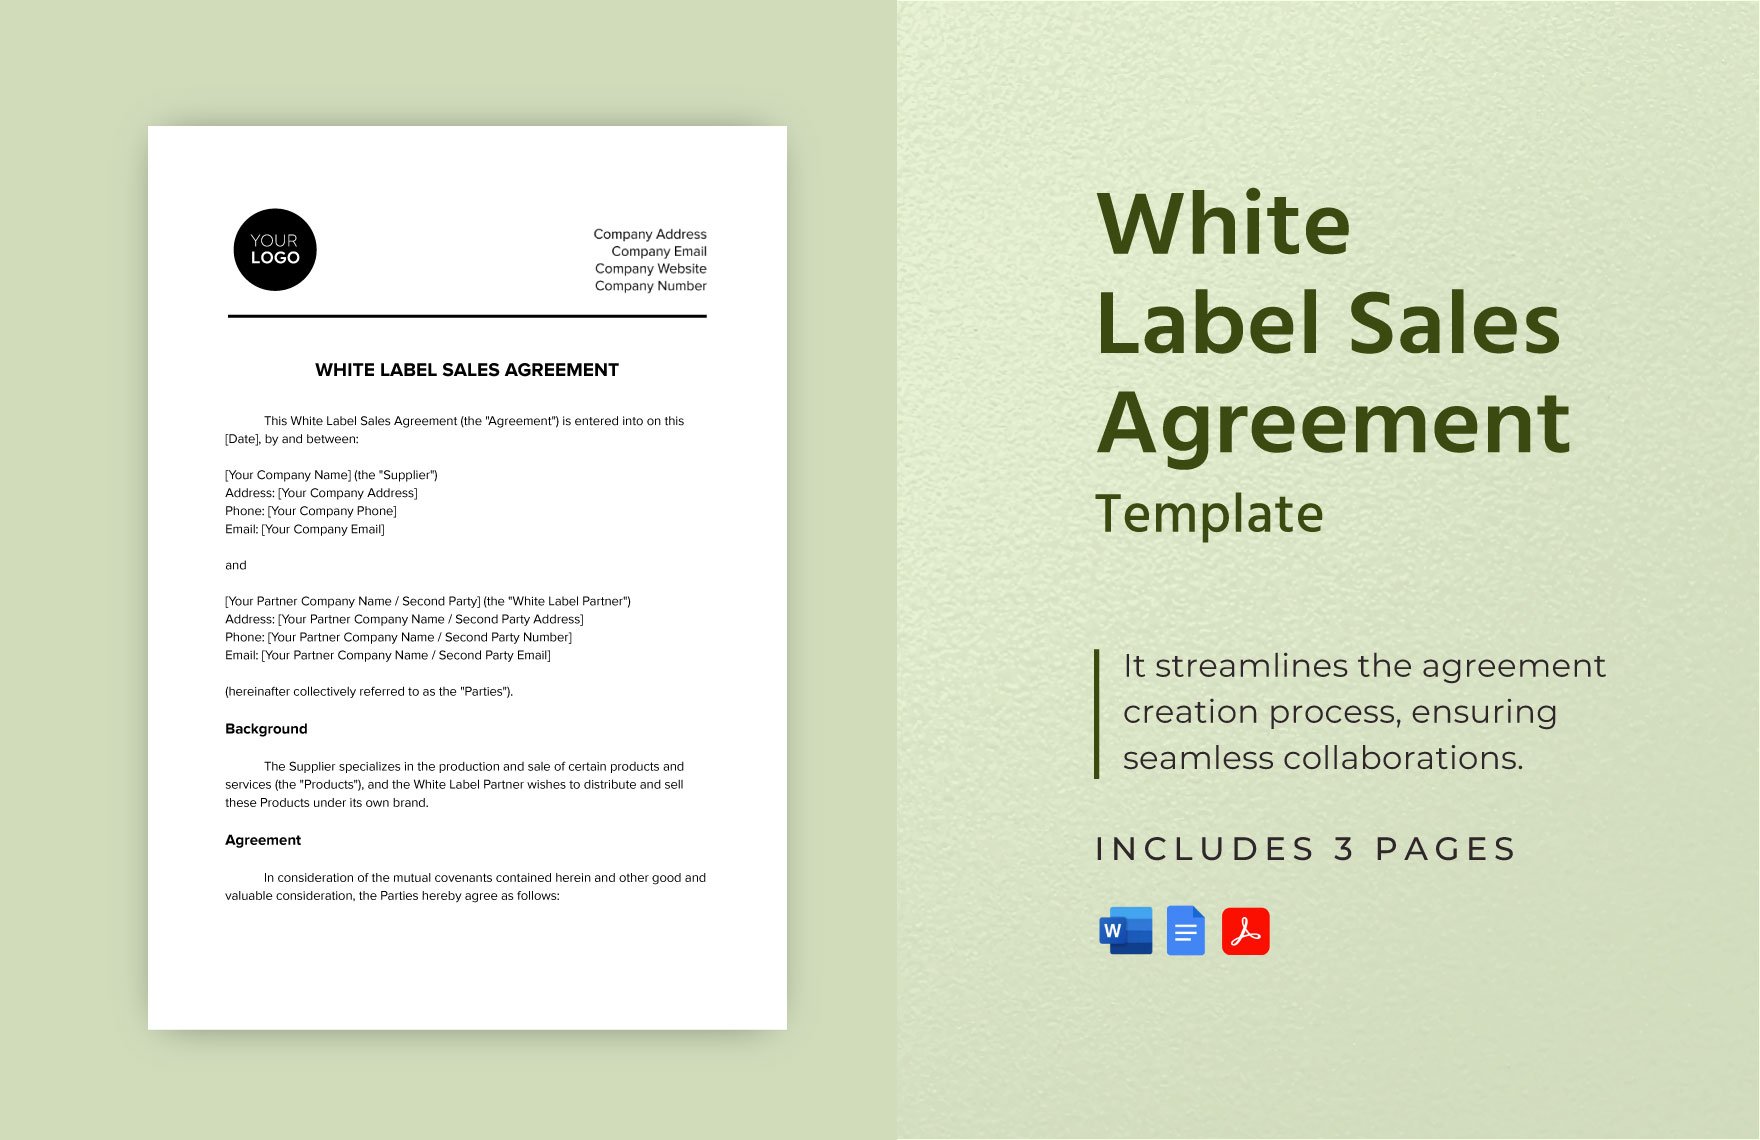 White Label Sales Agreement Template